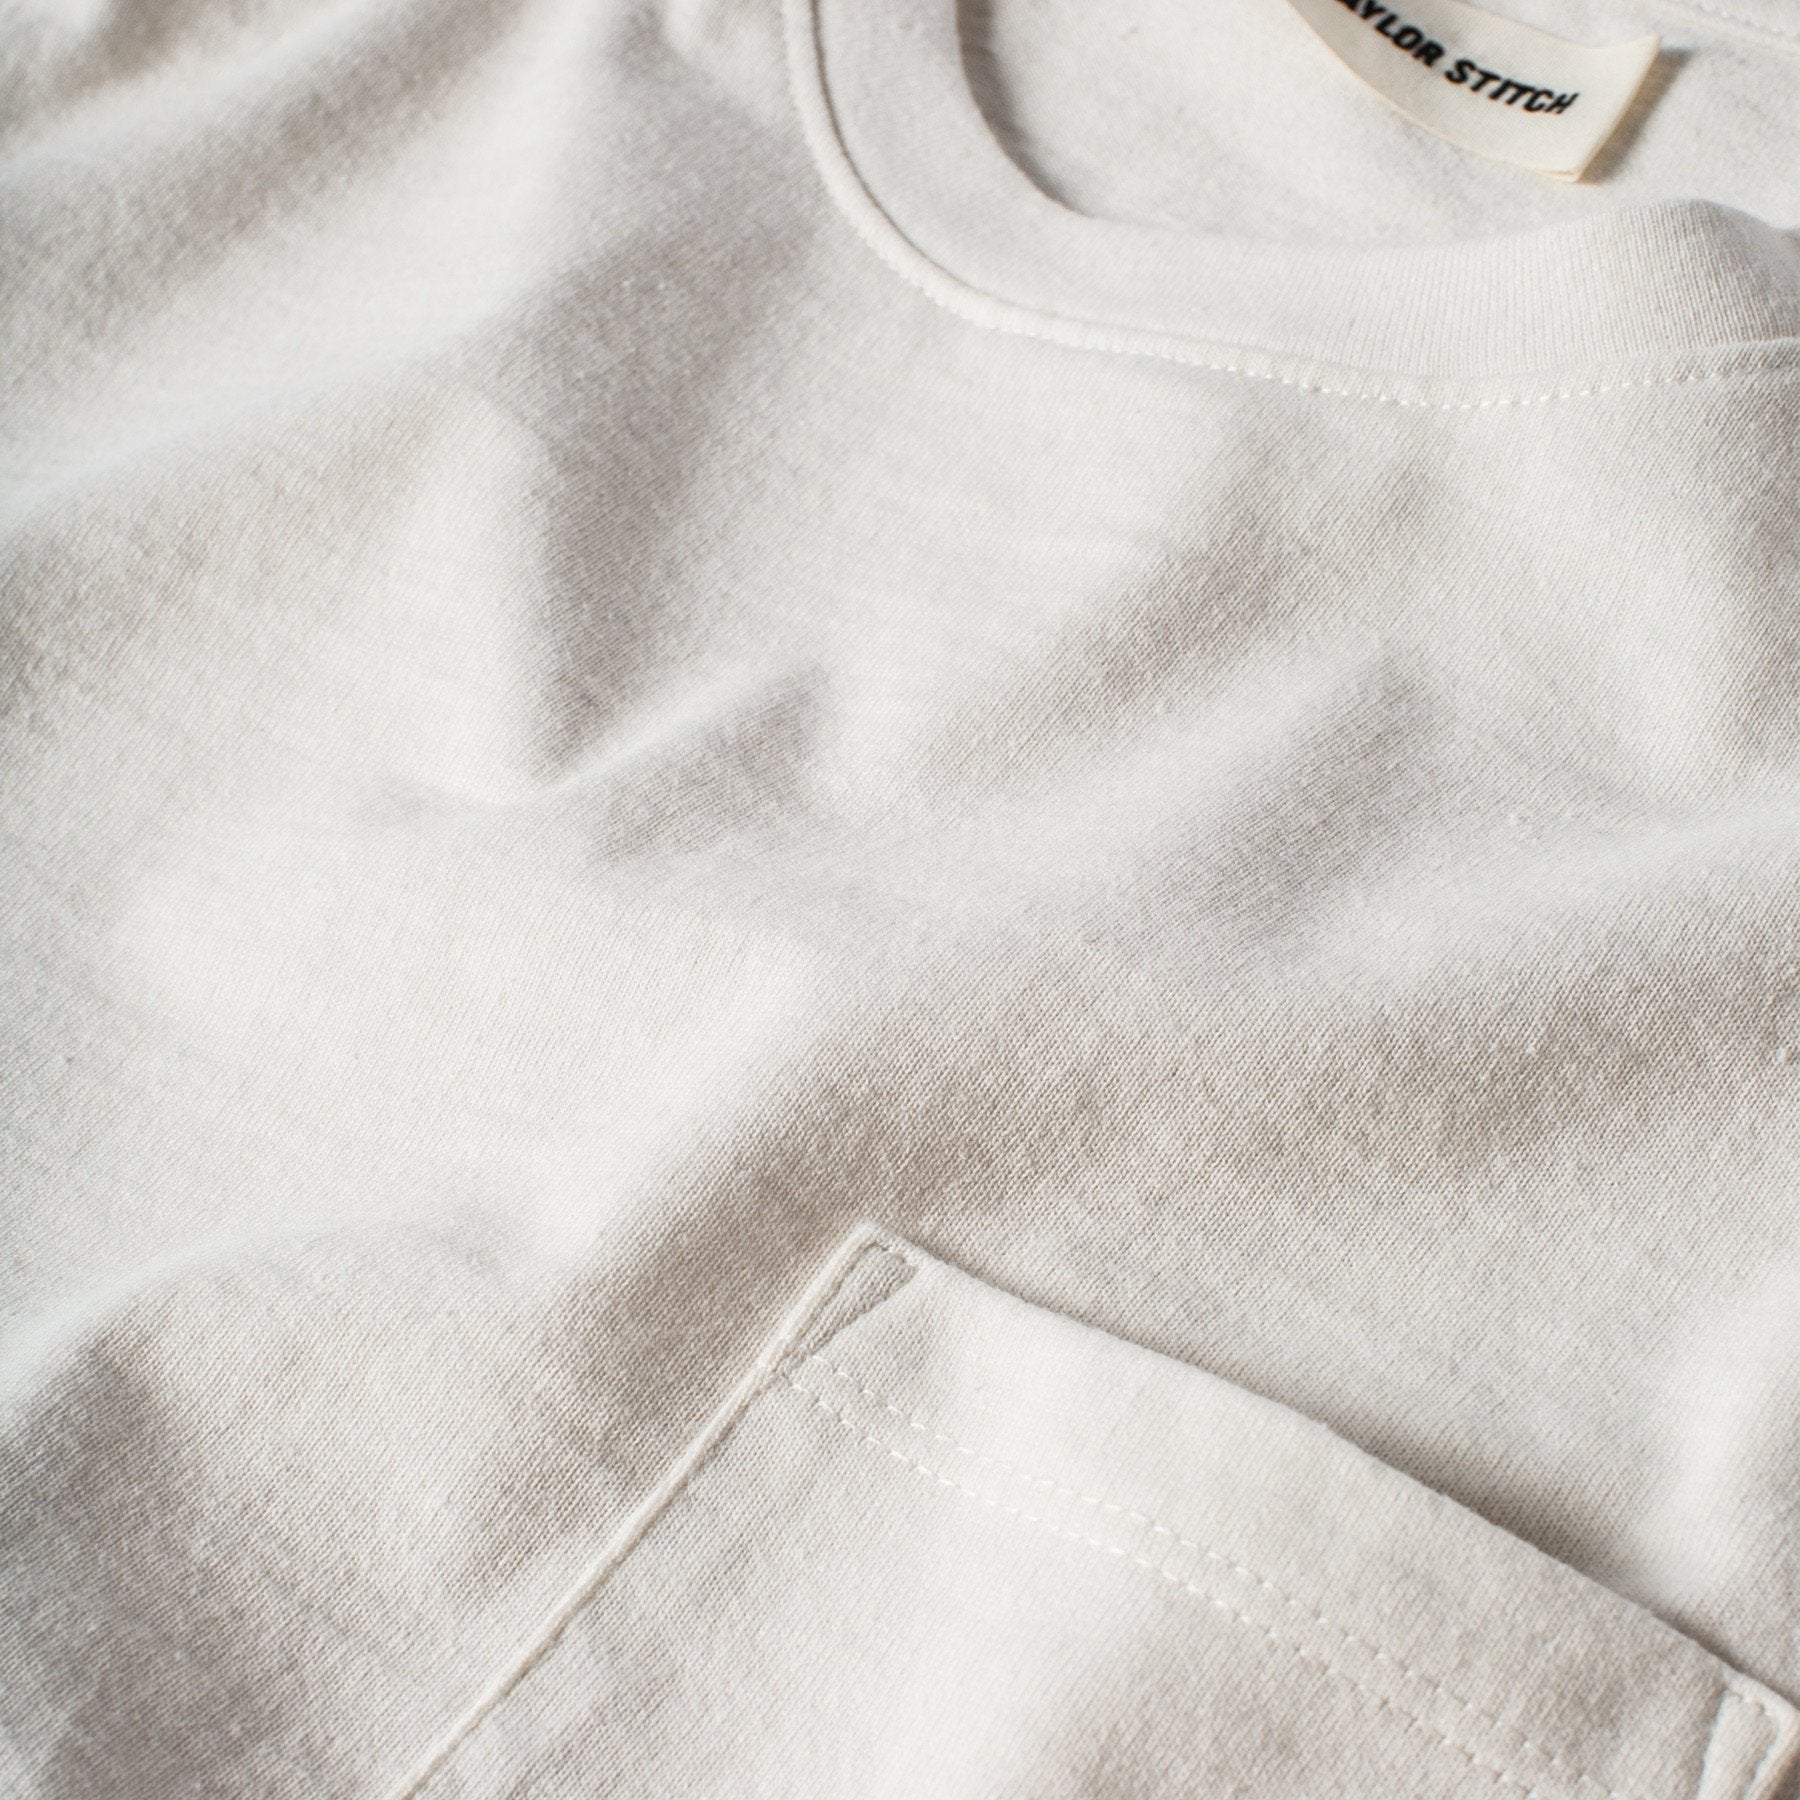 Taylor Stitch - Heavy Bag Tee in Natural